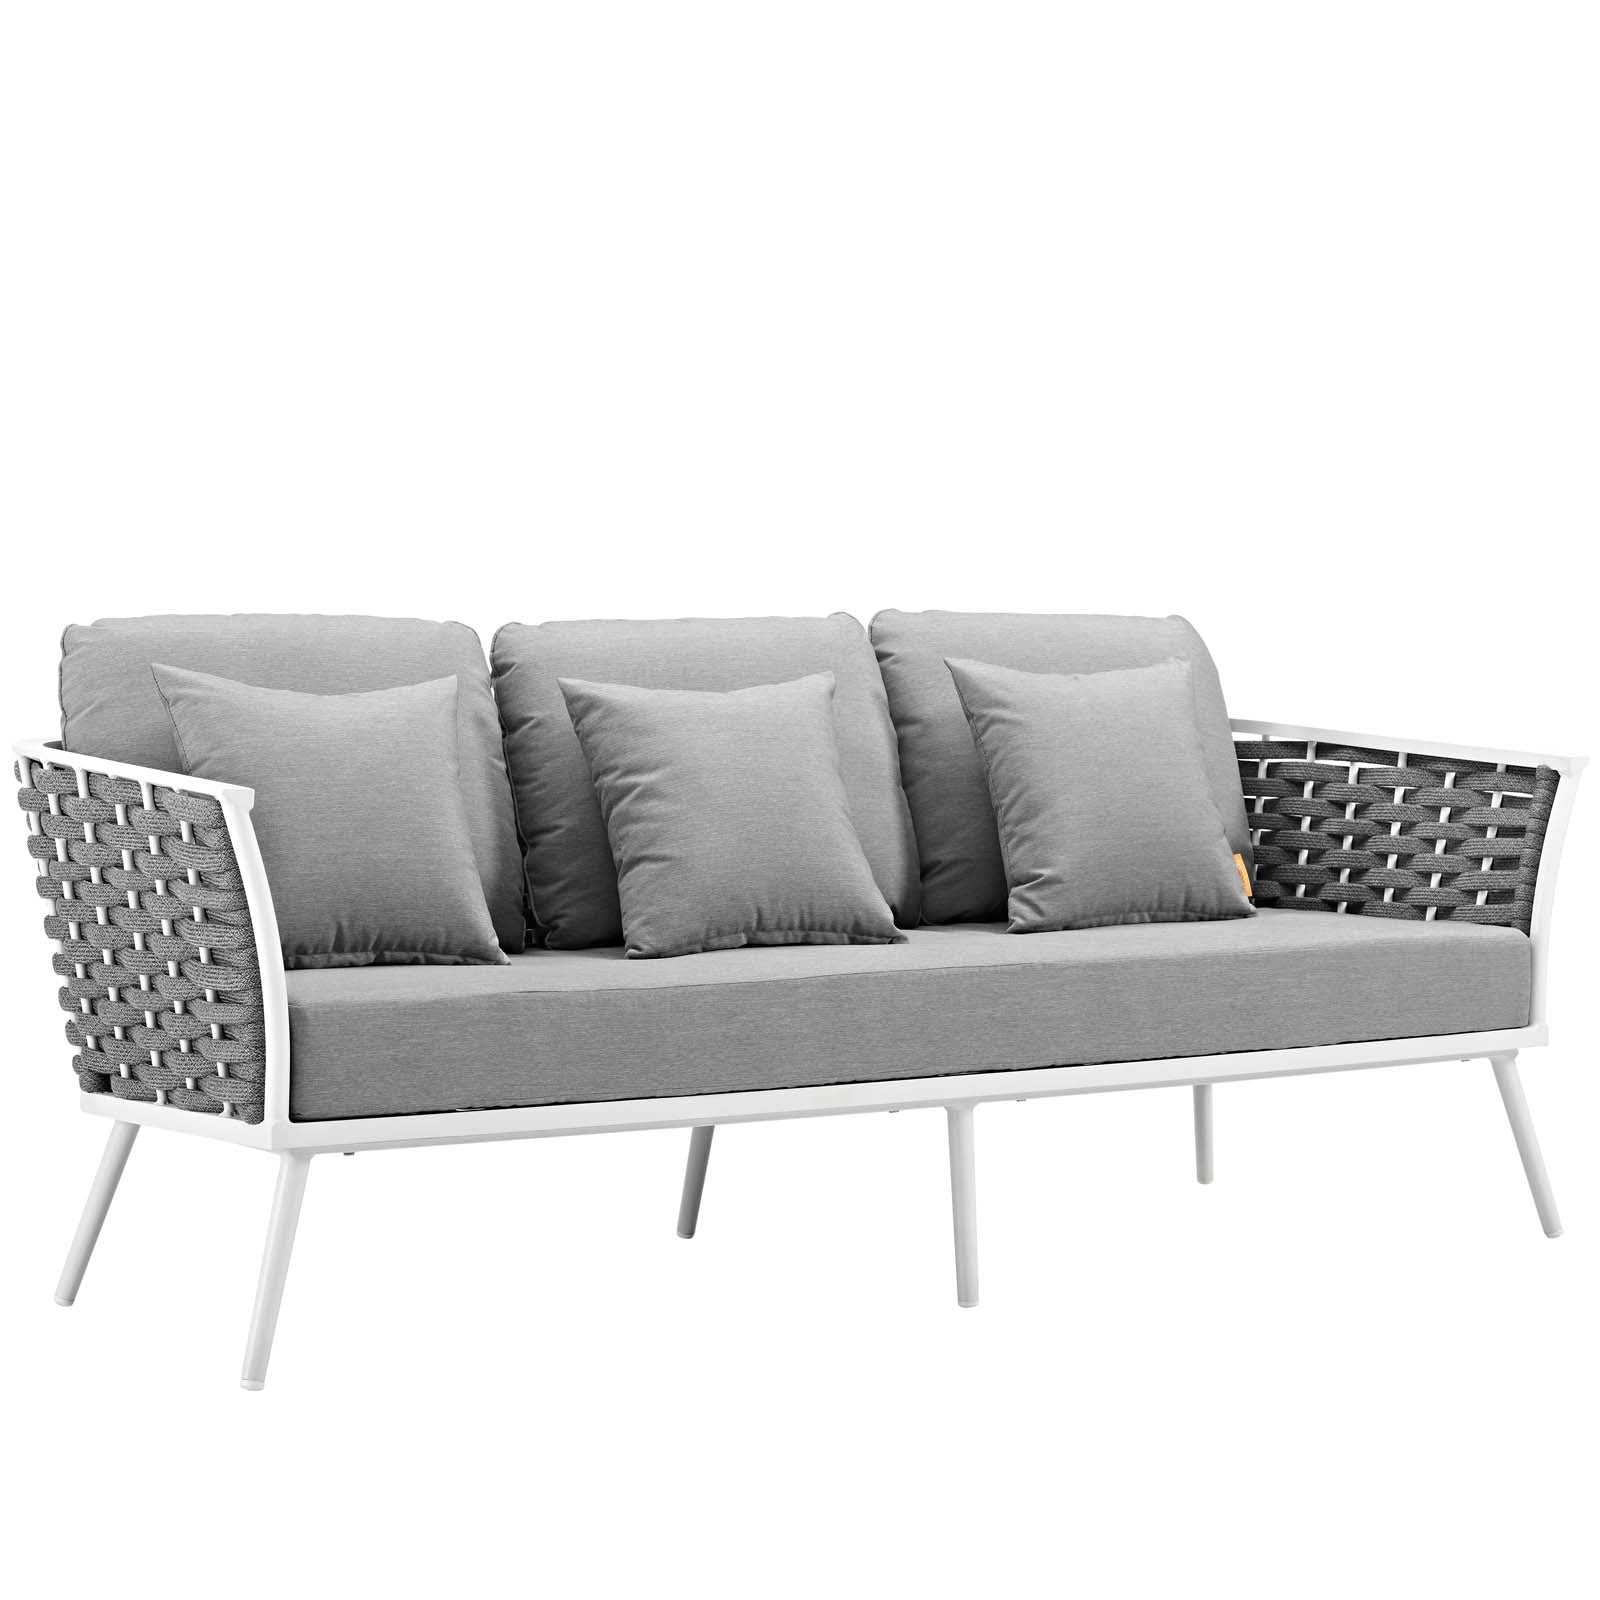 Stance 2 Piece Outdoor Patio Aluminum Sectional Sofa Set-Outdoor Set-Modway-Wall2Wall Furnishings